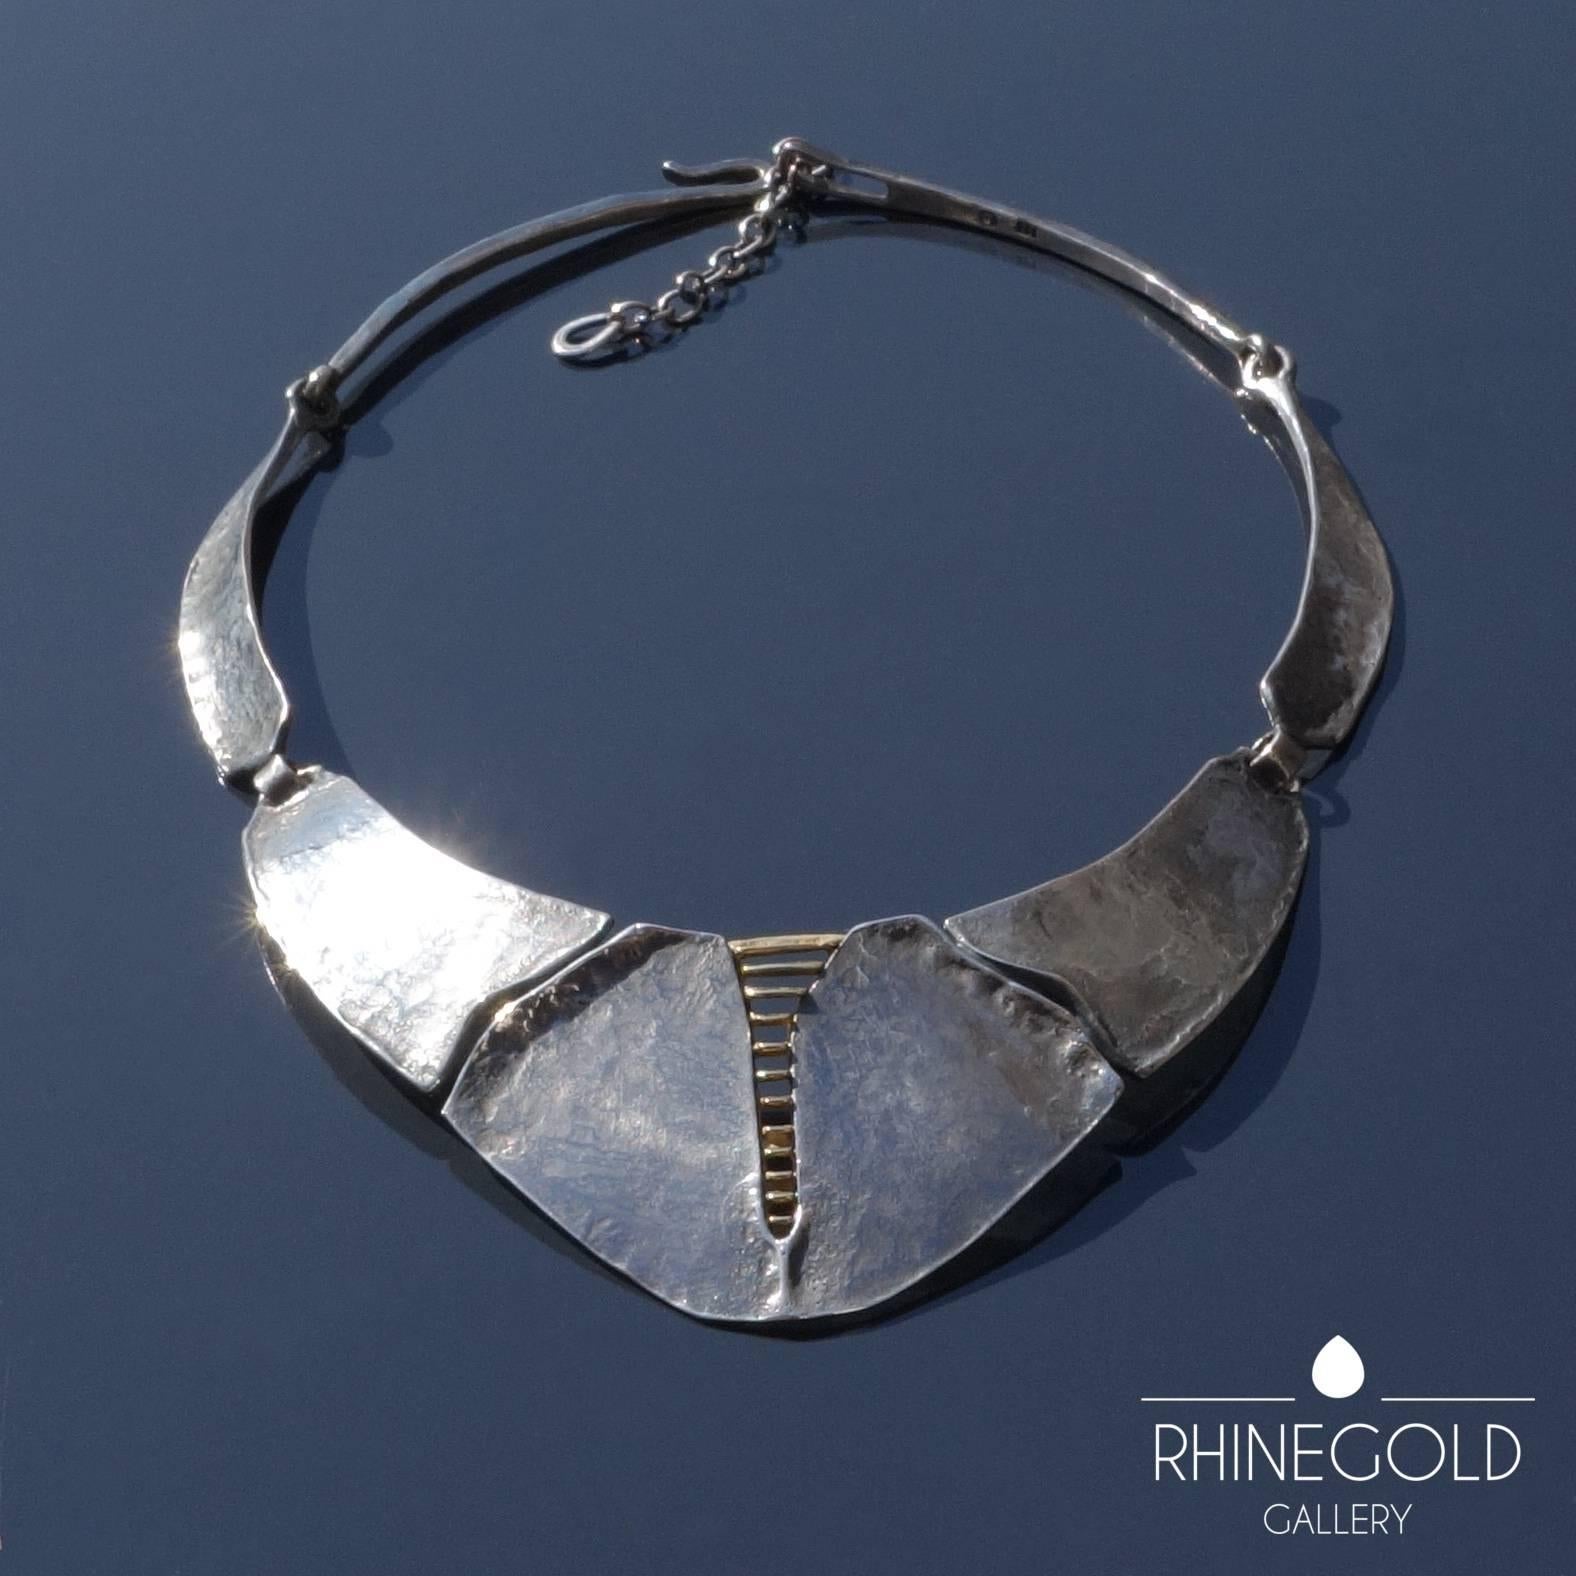 Burkhard & Monika Oly Modernist Silver and Gold Necklace
Sterling silver, 22k yellow gold
Length adjustable from 39 to 45.5 cm (approx. 15 3/8